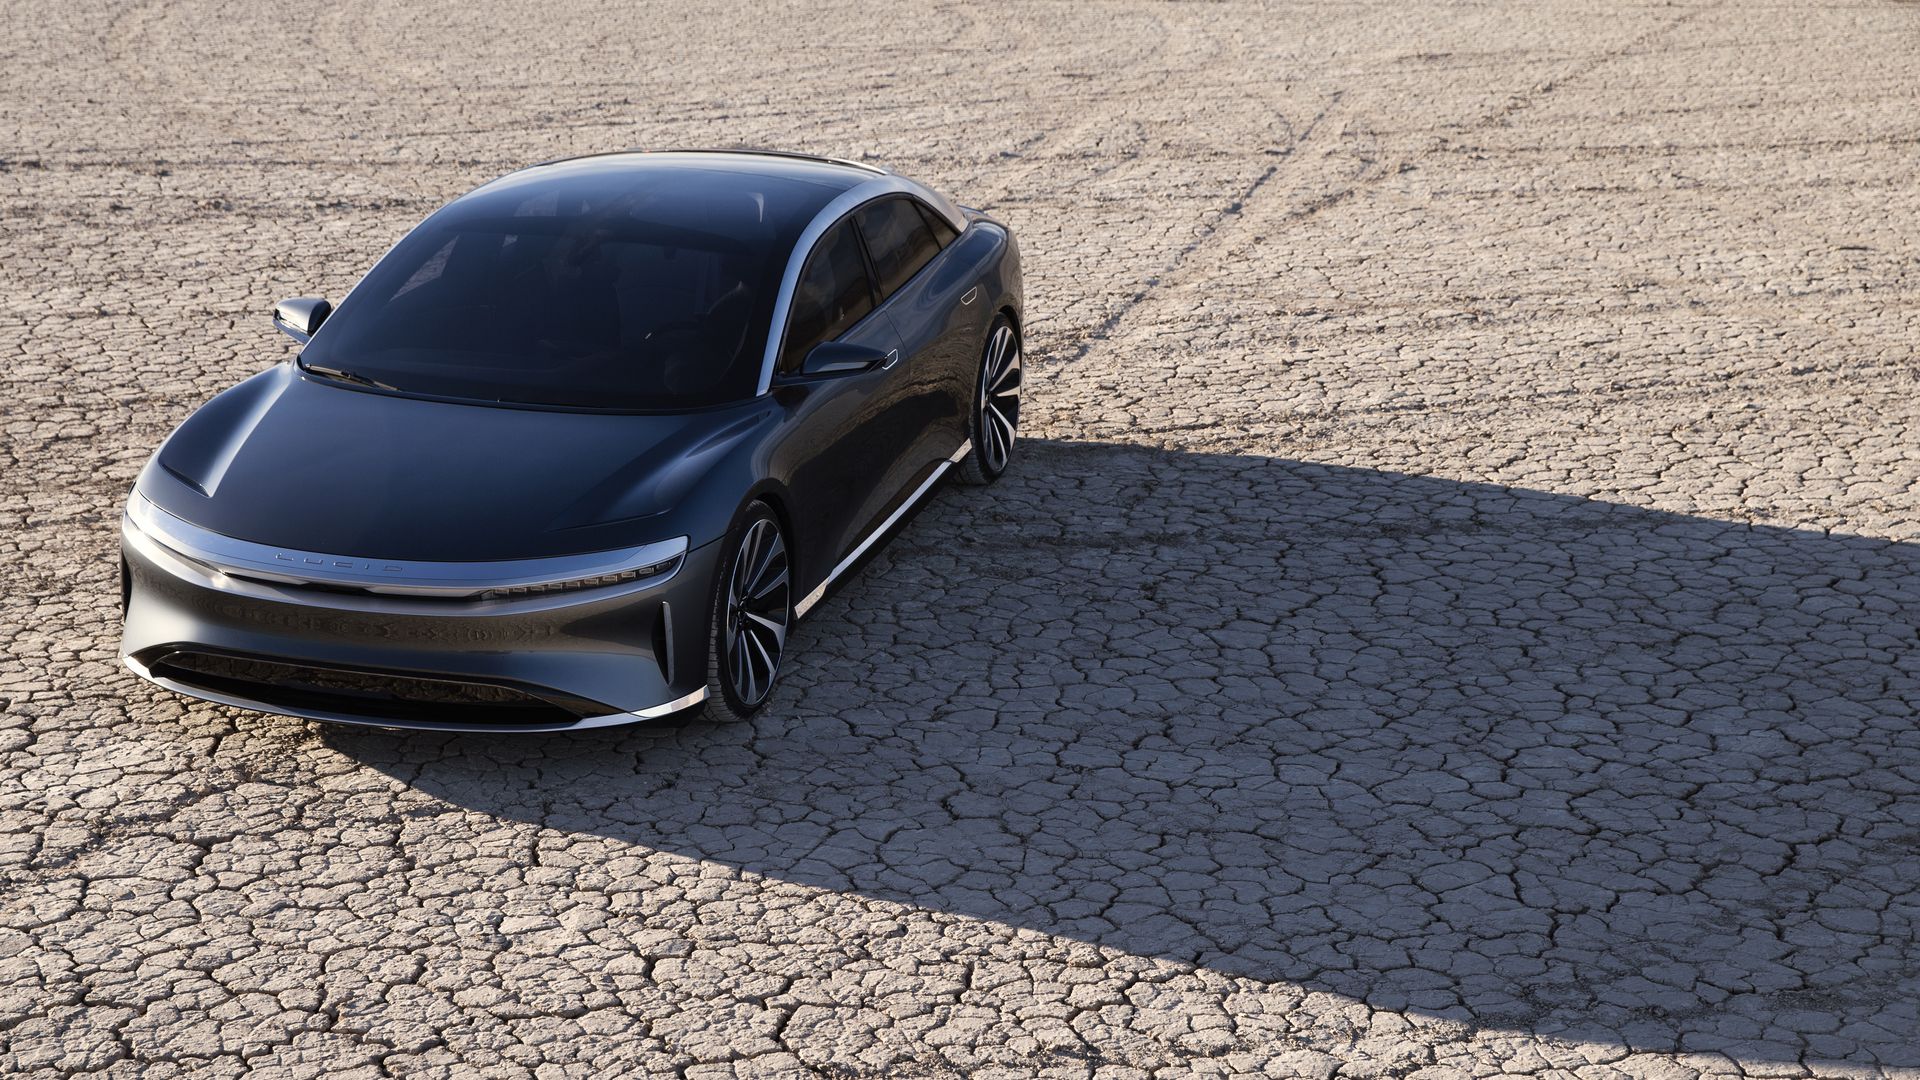 Image of Lucid Air, a new electric vehicle challenging Tesla